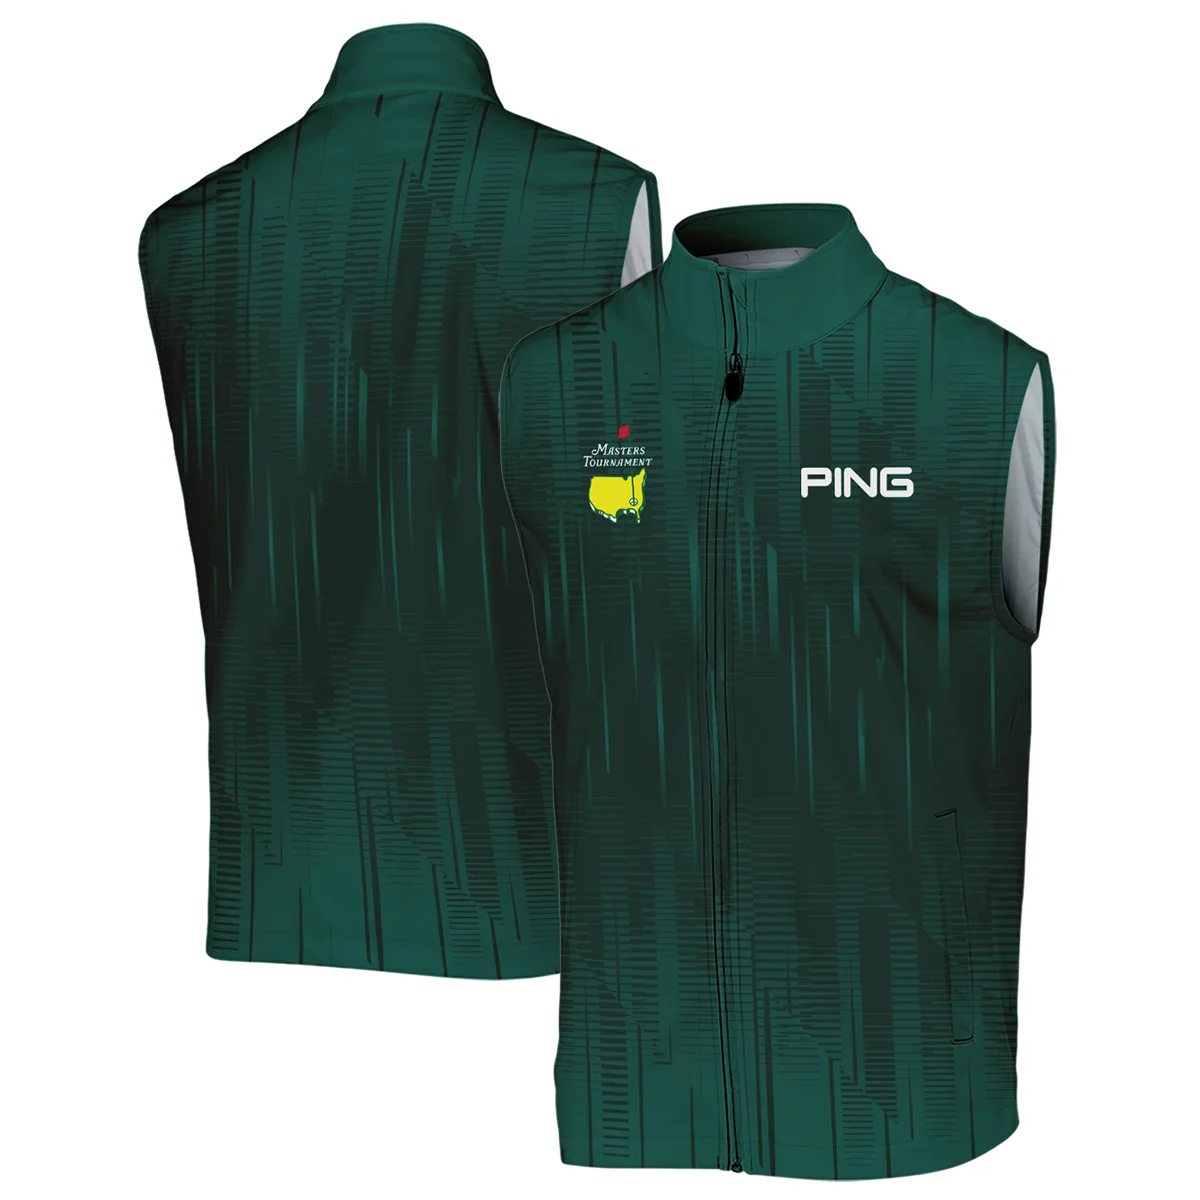 Masters Tournament Ping Dark Green Gradient Stripes Pattern Vneck Long Polo Shirt Style Classic Long Polo Shirt For Men